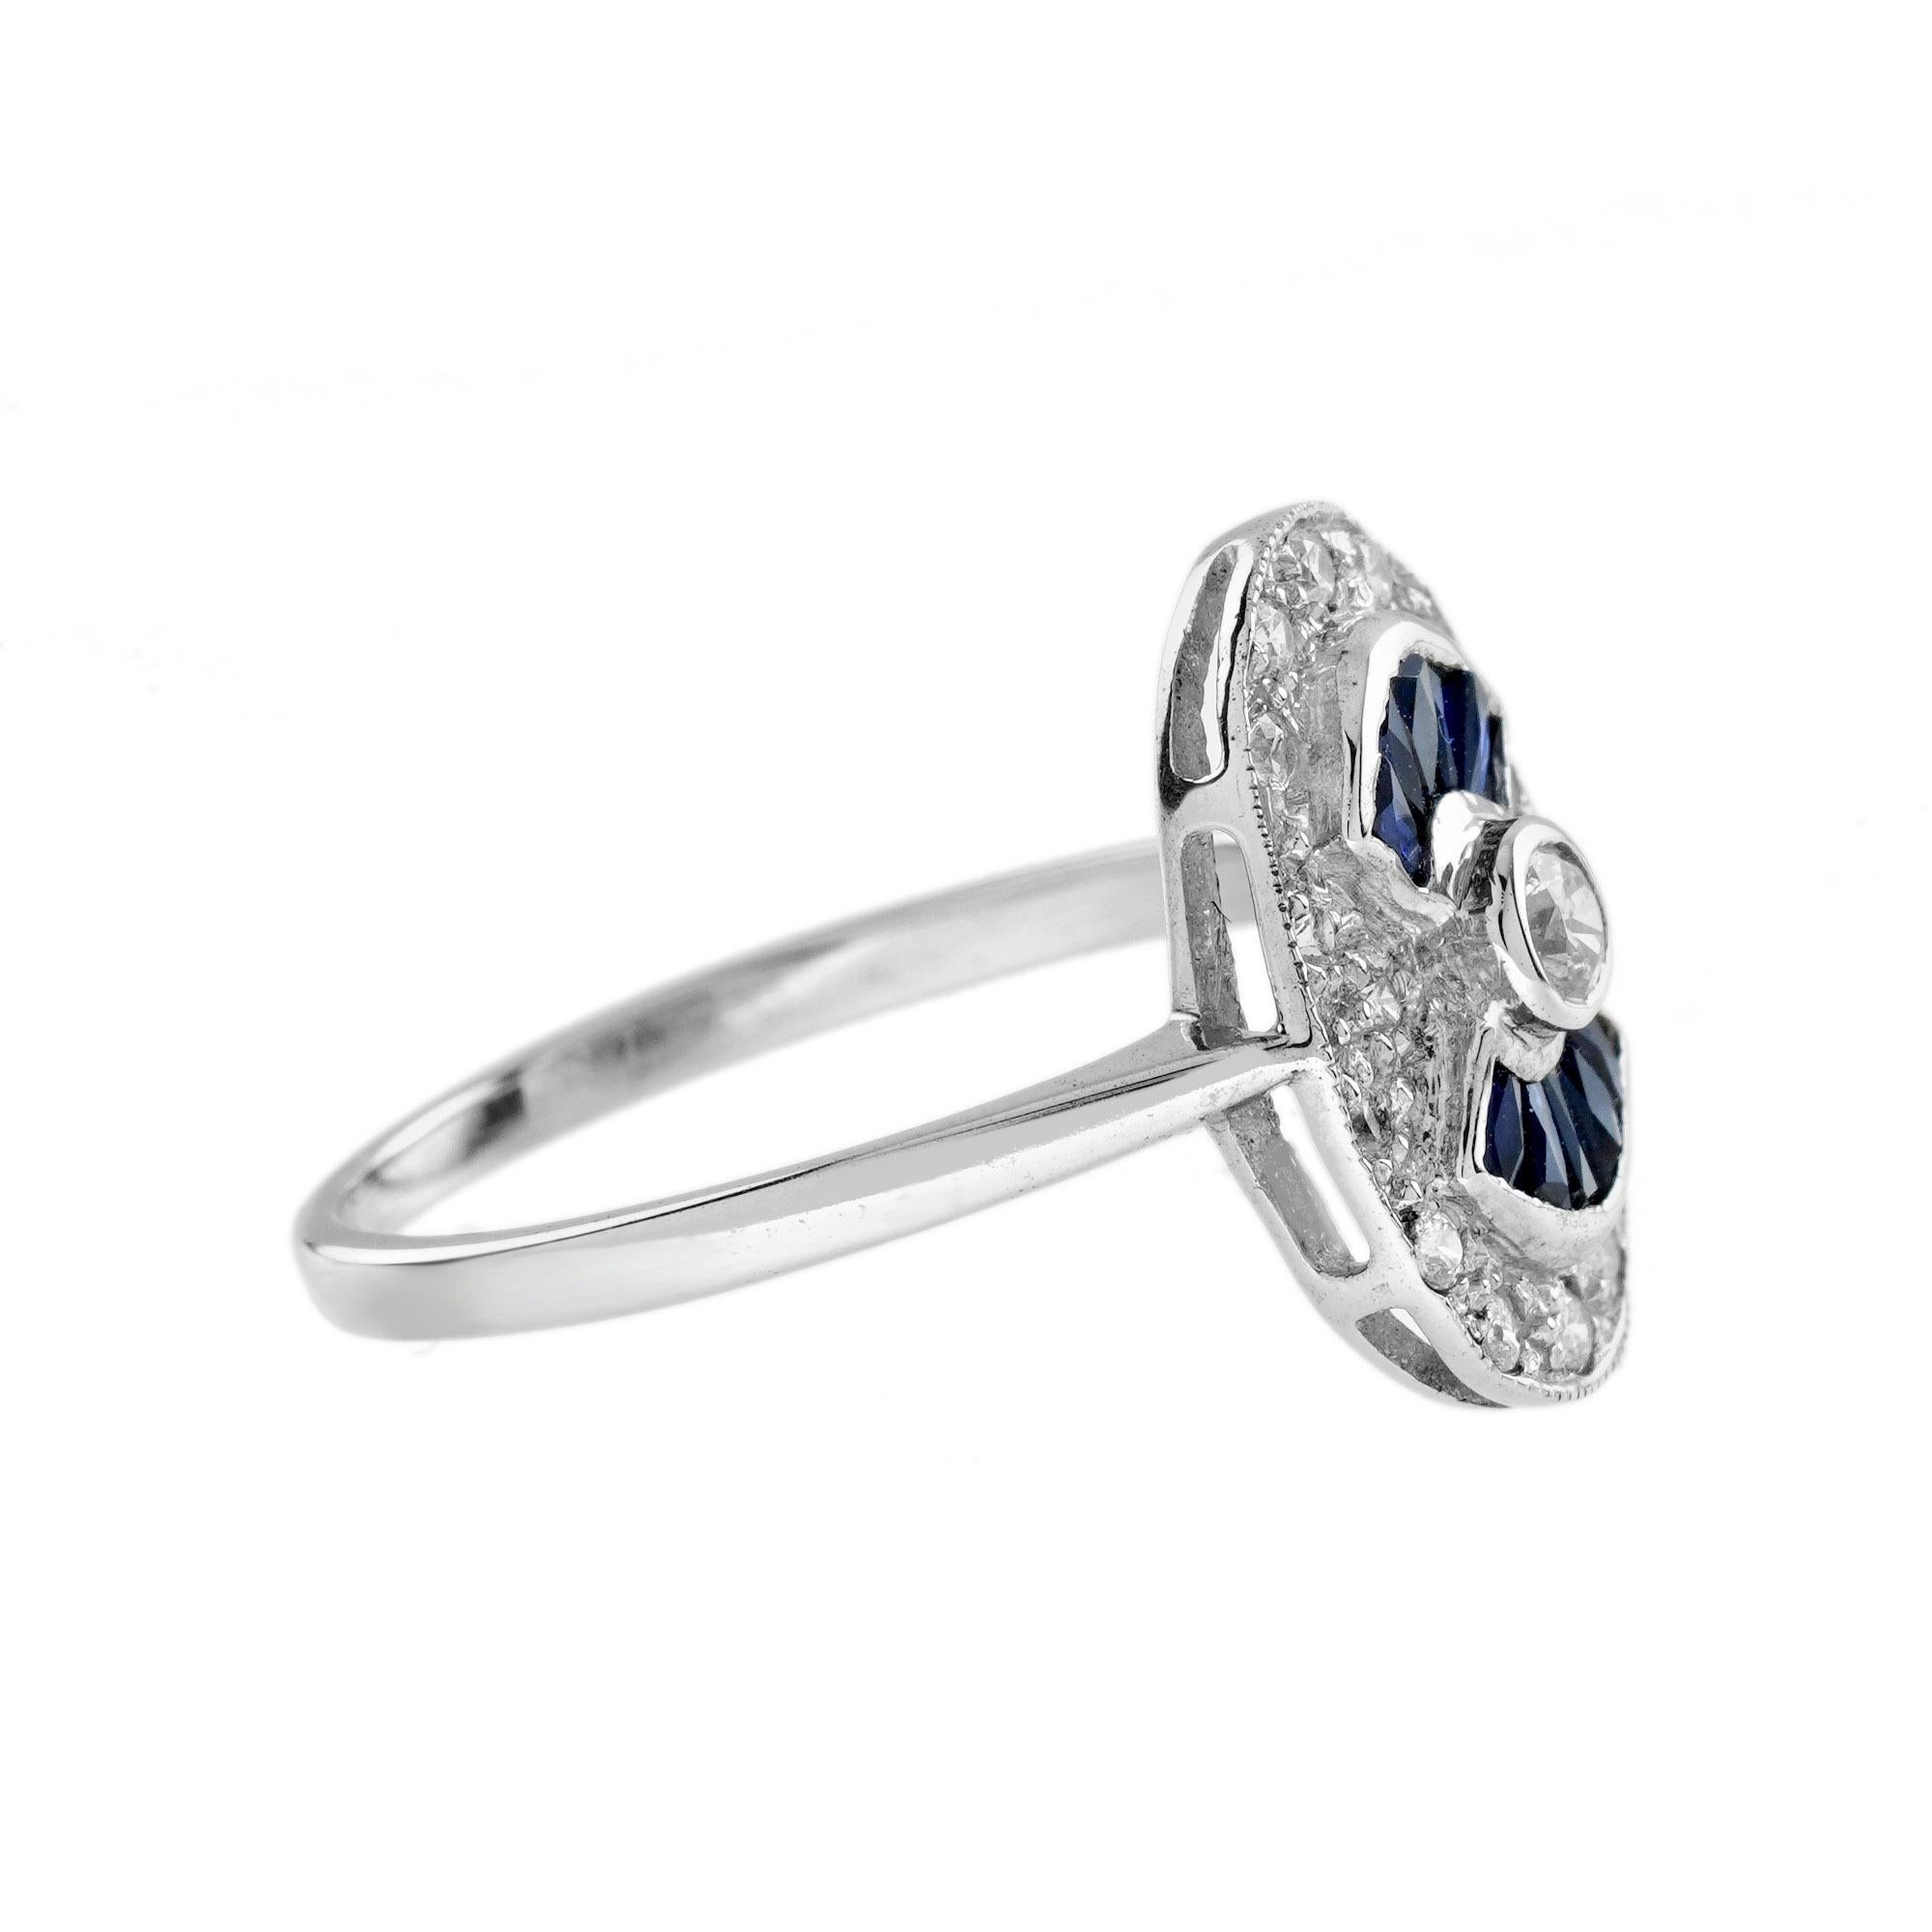 For Sale:  Diamond and Blue Sapphire Art Deco Style Oval Shaped Ring in 14K White Gold 4